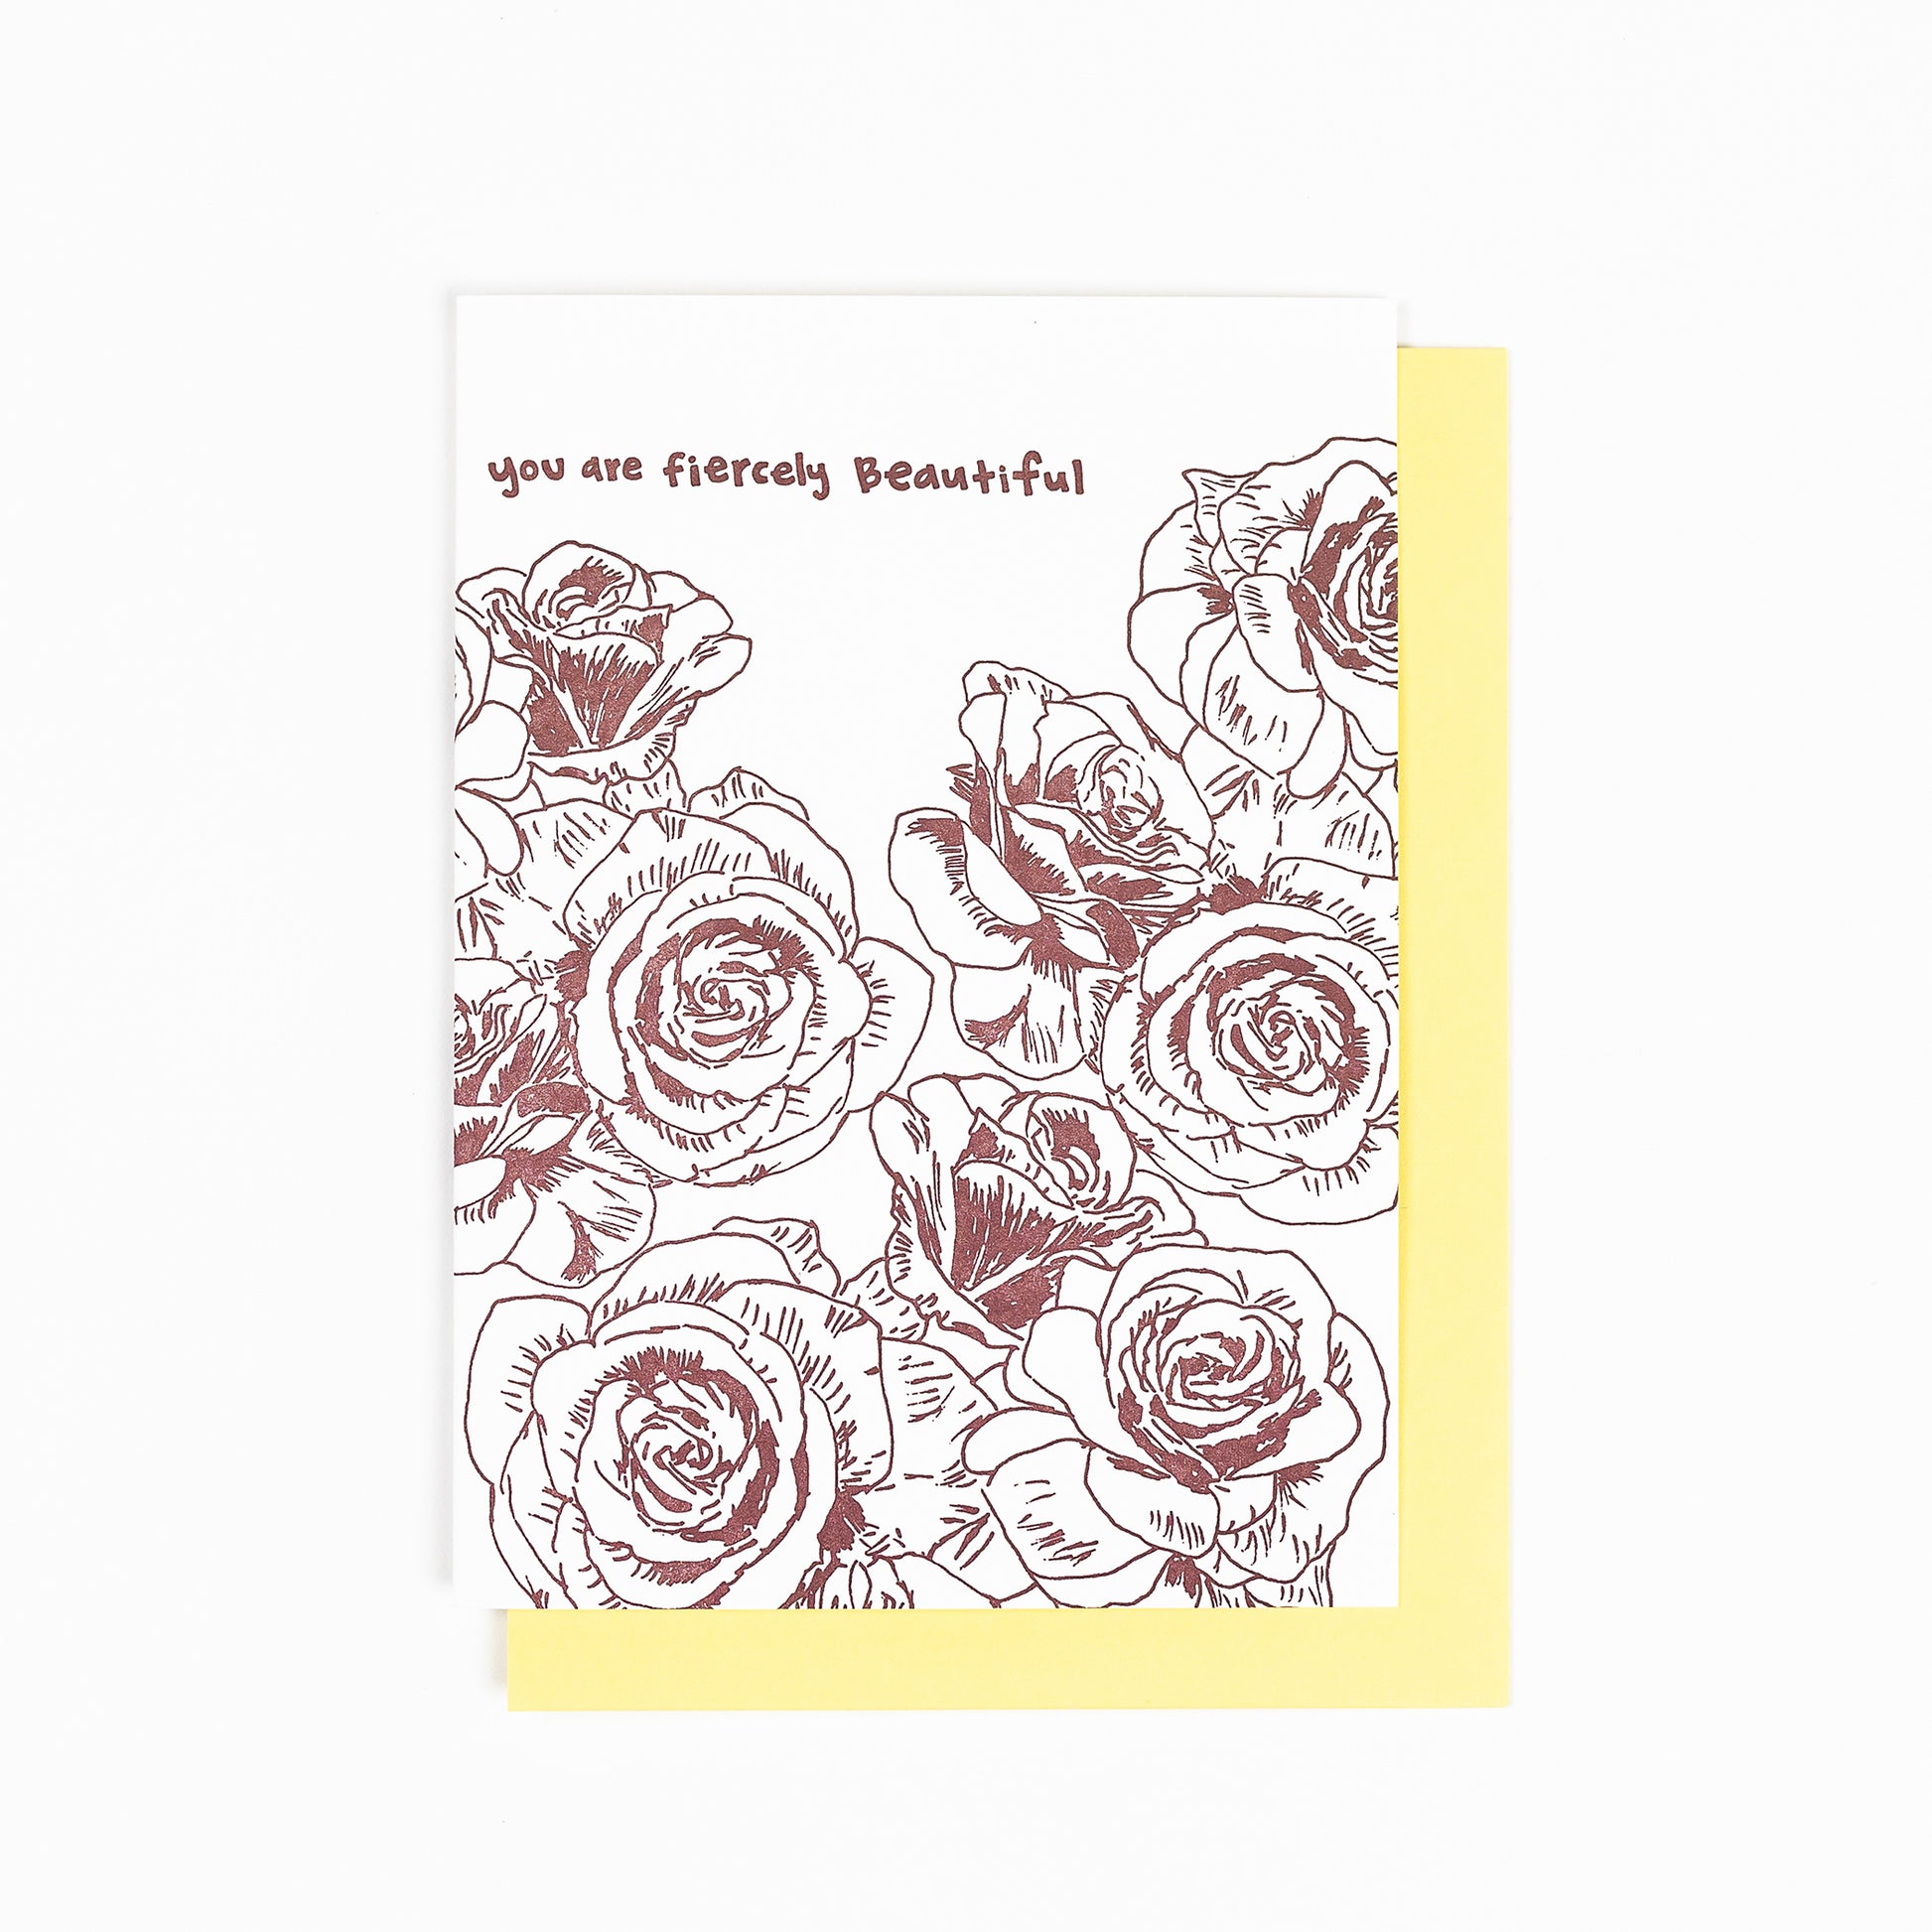 Letterpress greeting card featuring hand-drawn rose flowers printed in a rich, warm brown ink. Whimsical hand-drawn text saying "you are fiercely beautiful" is shown at the top of the card, in the same brown ink. The card is white, blank inside, and is paired with a soft yellow envelope.